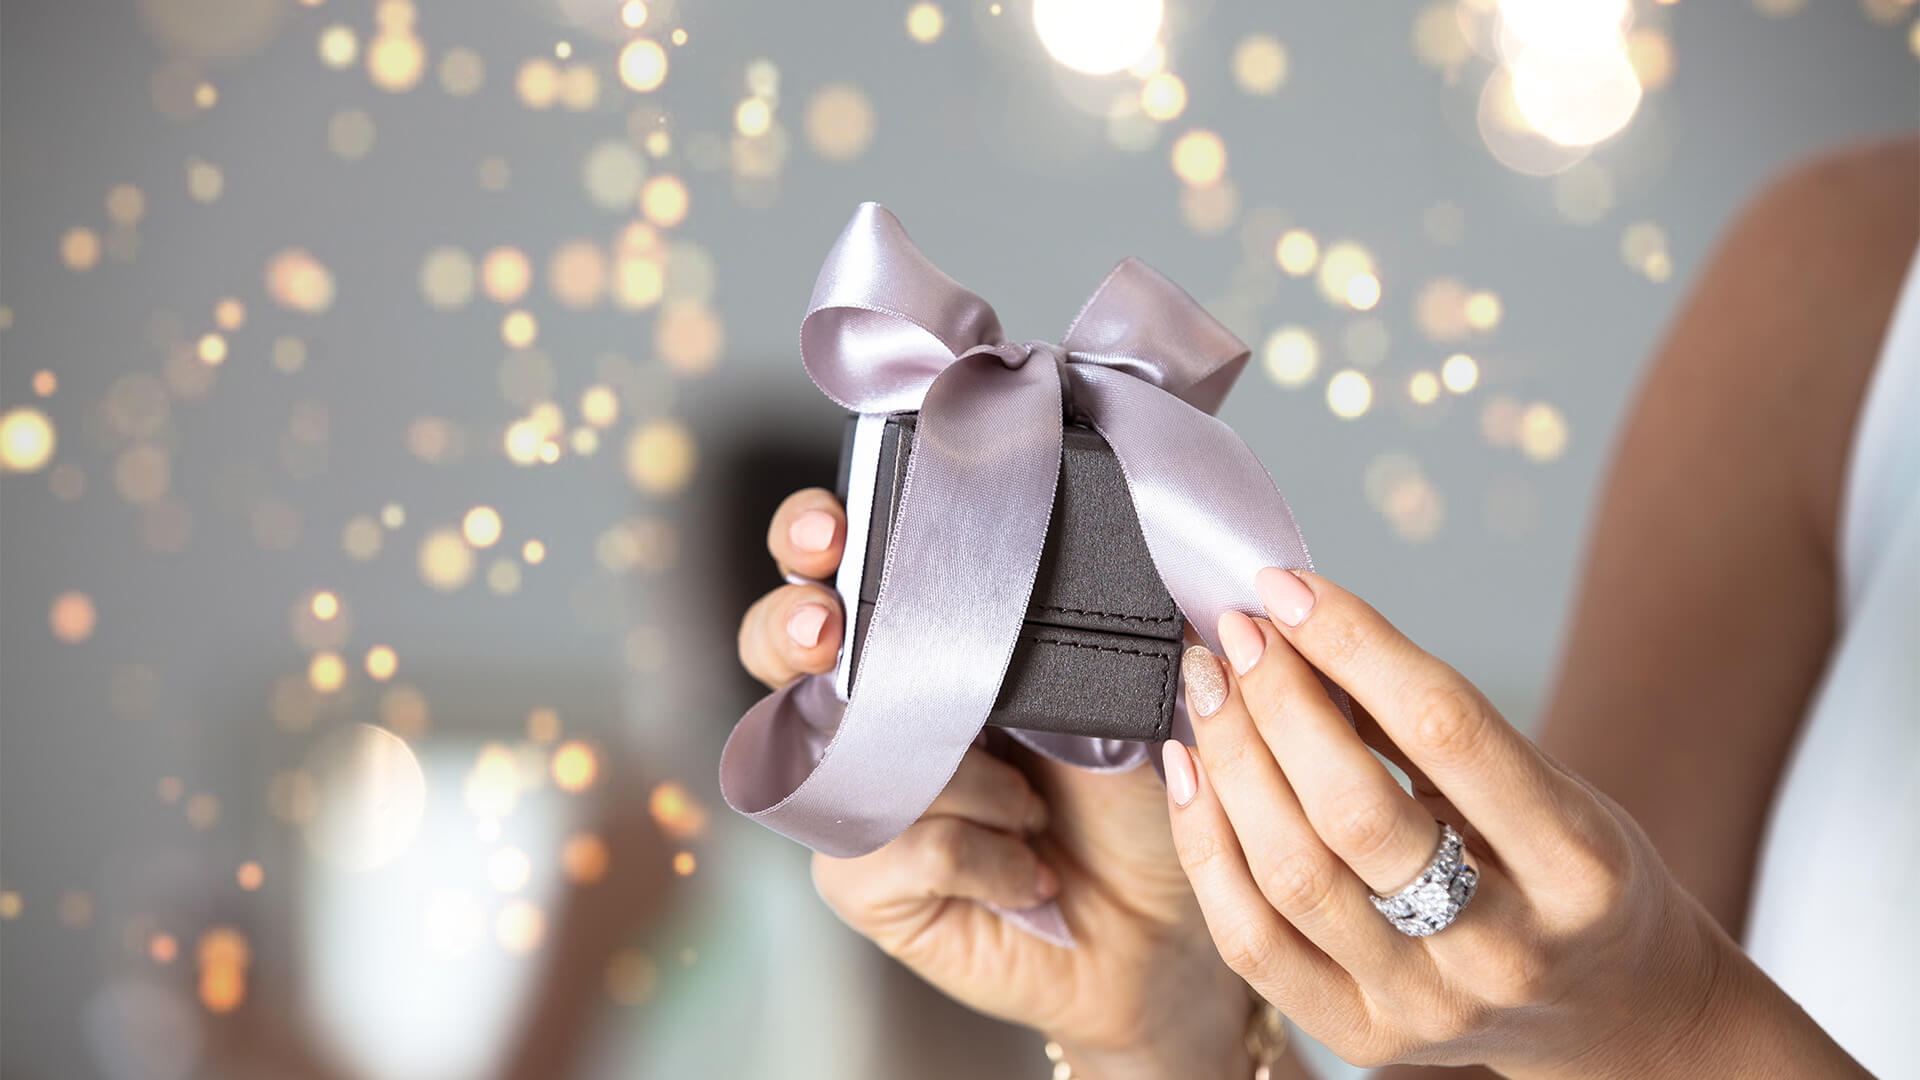 CLoseup of woman holding a gift box containing jewellery